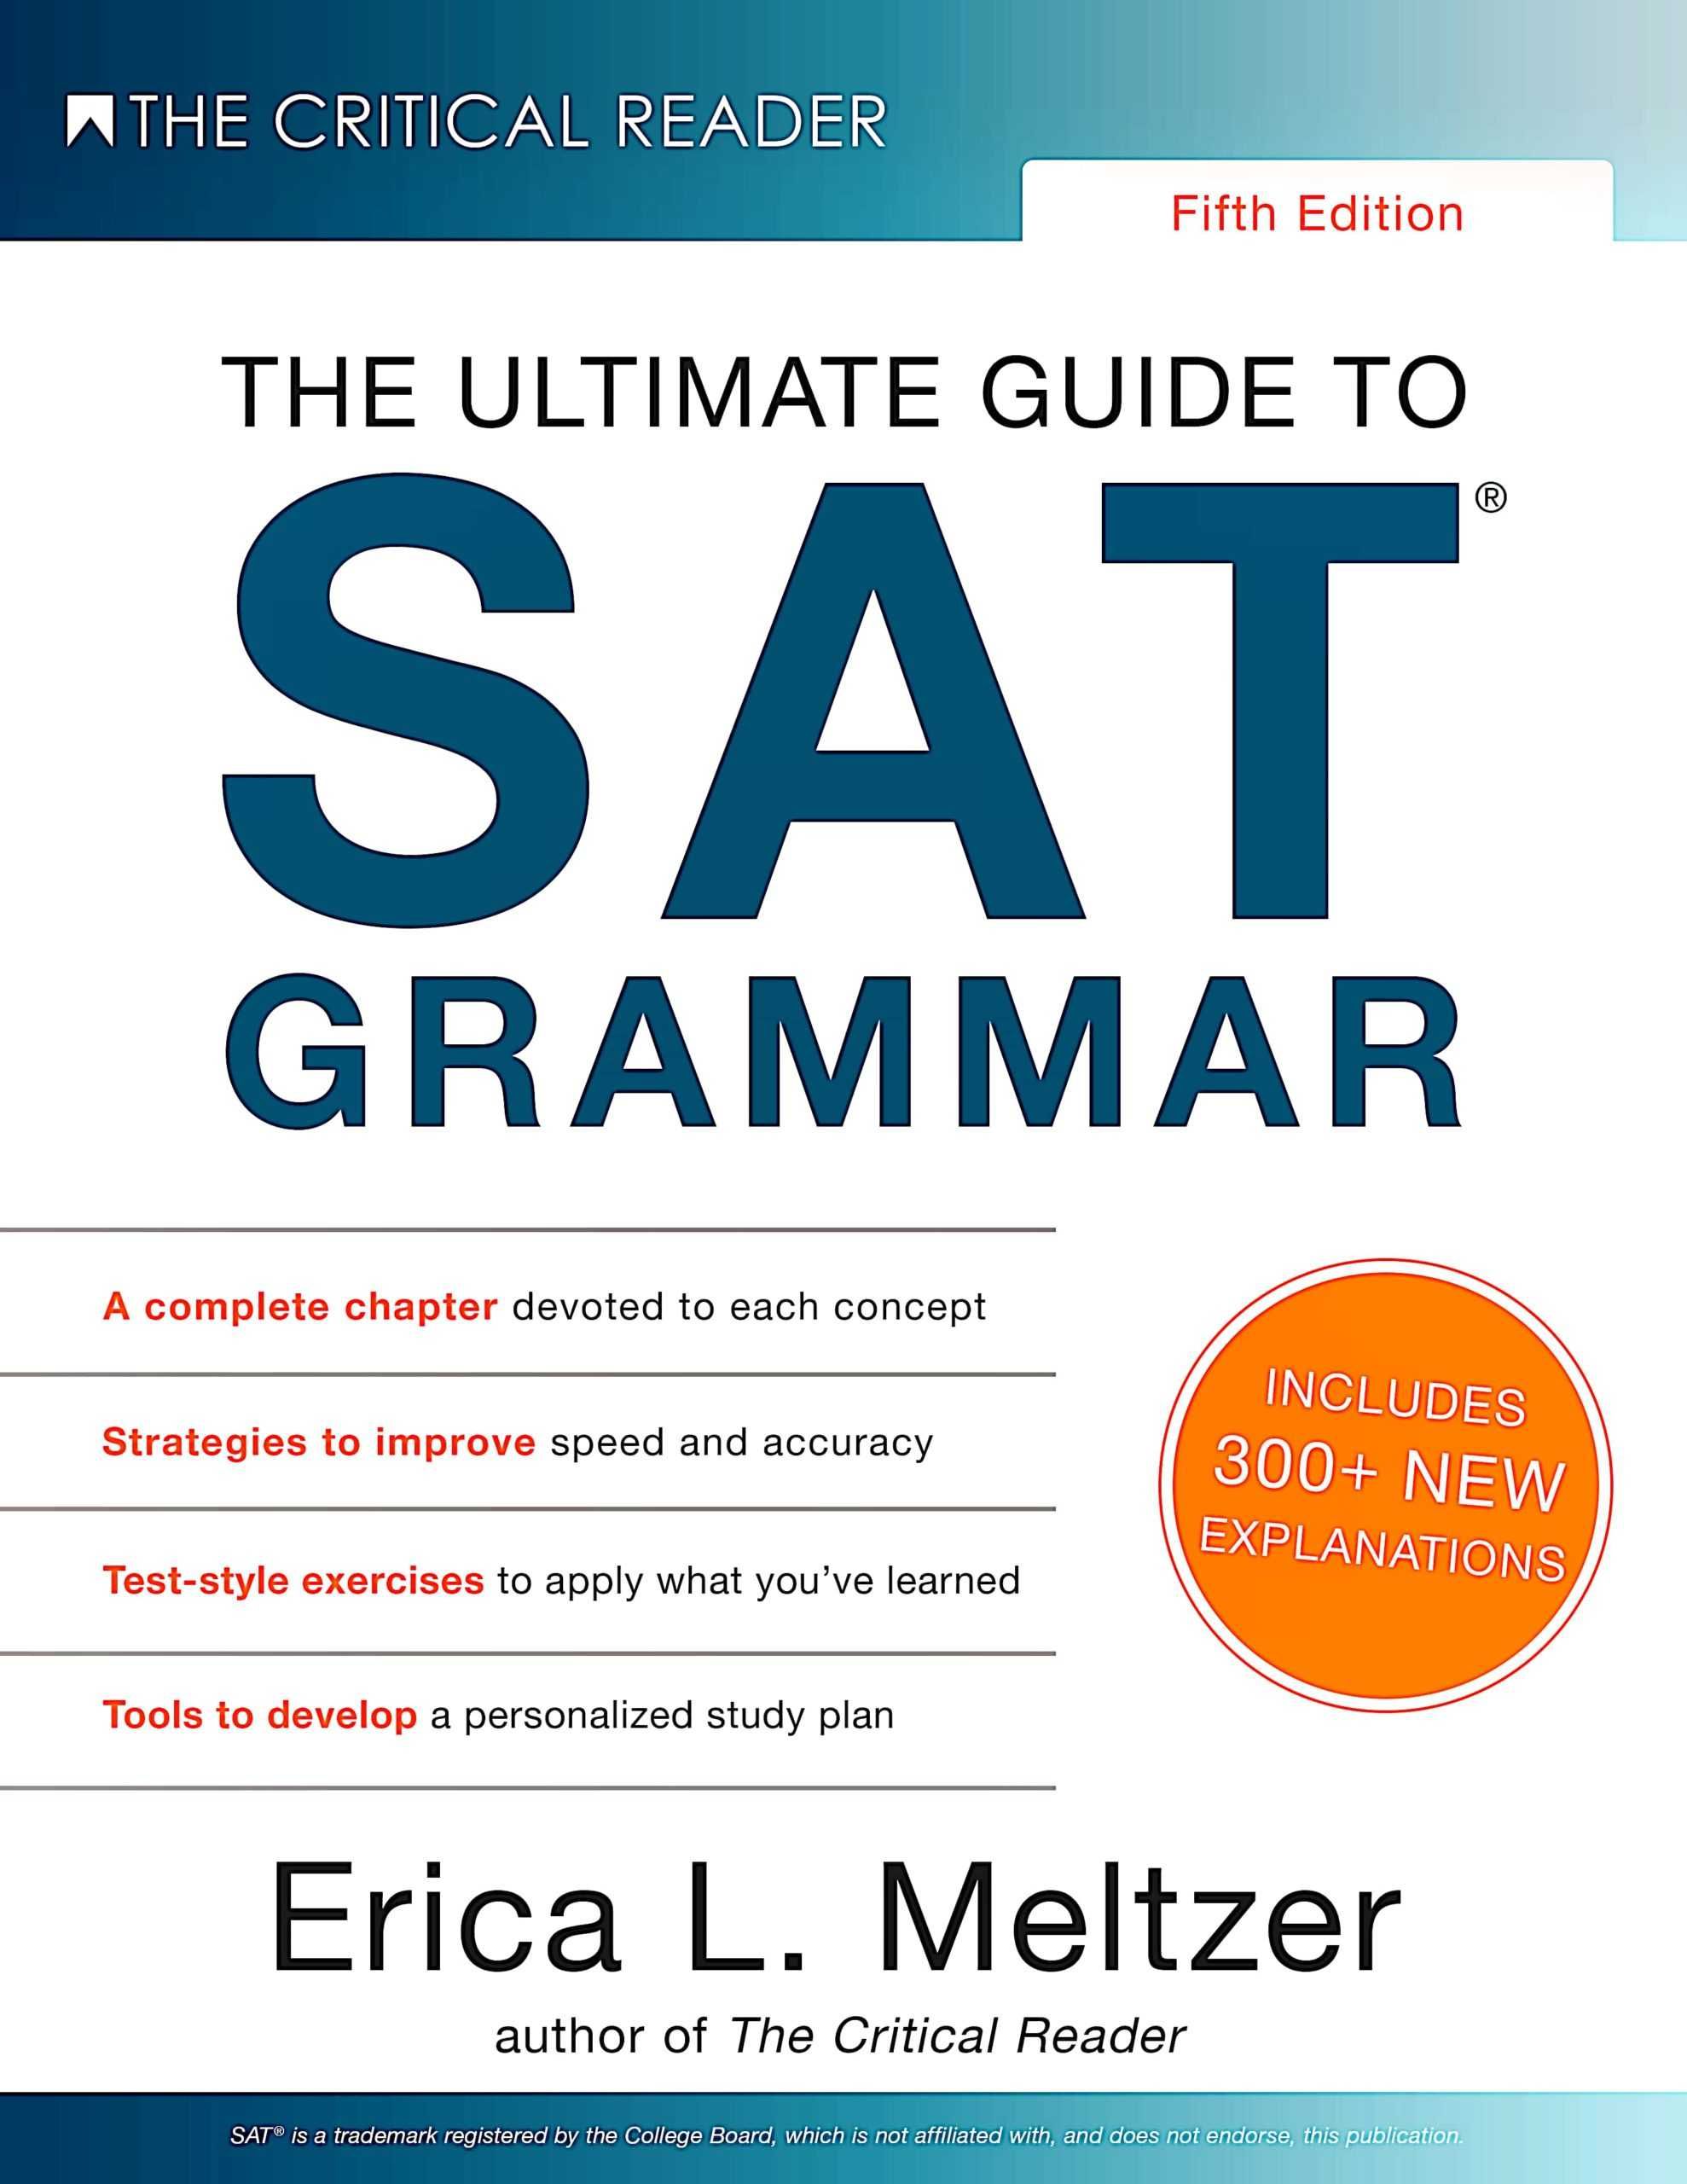 The Ultimate Guide to SAT Workbook